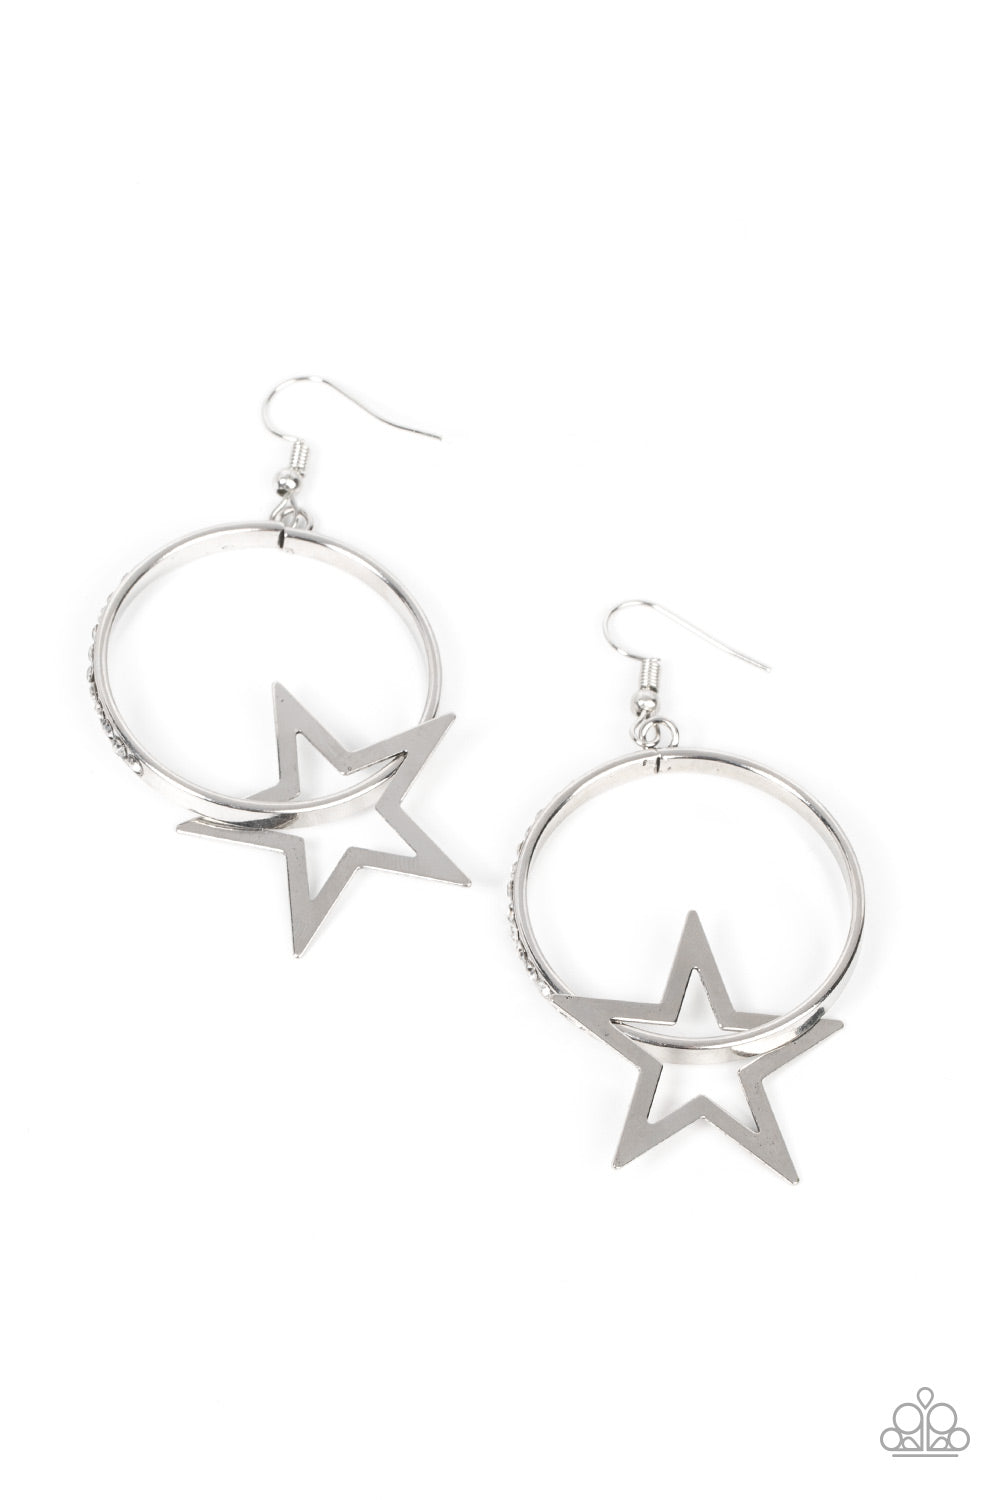 Paparazzi Superstar Showcase - White Earrings - A Finishing Touch Jewelry